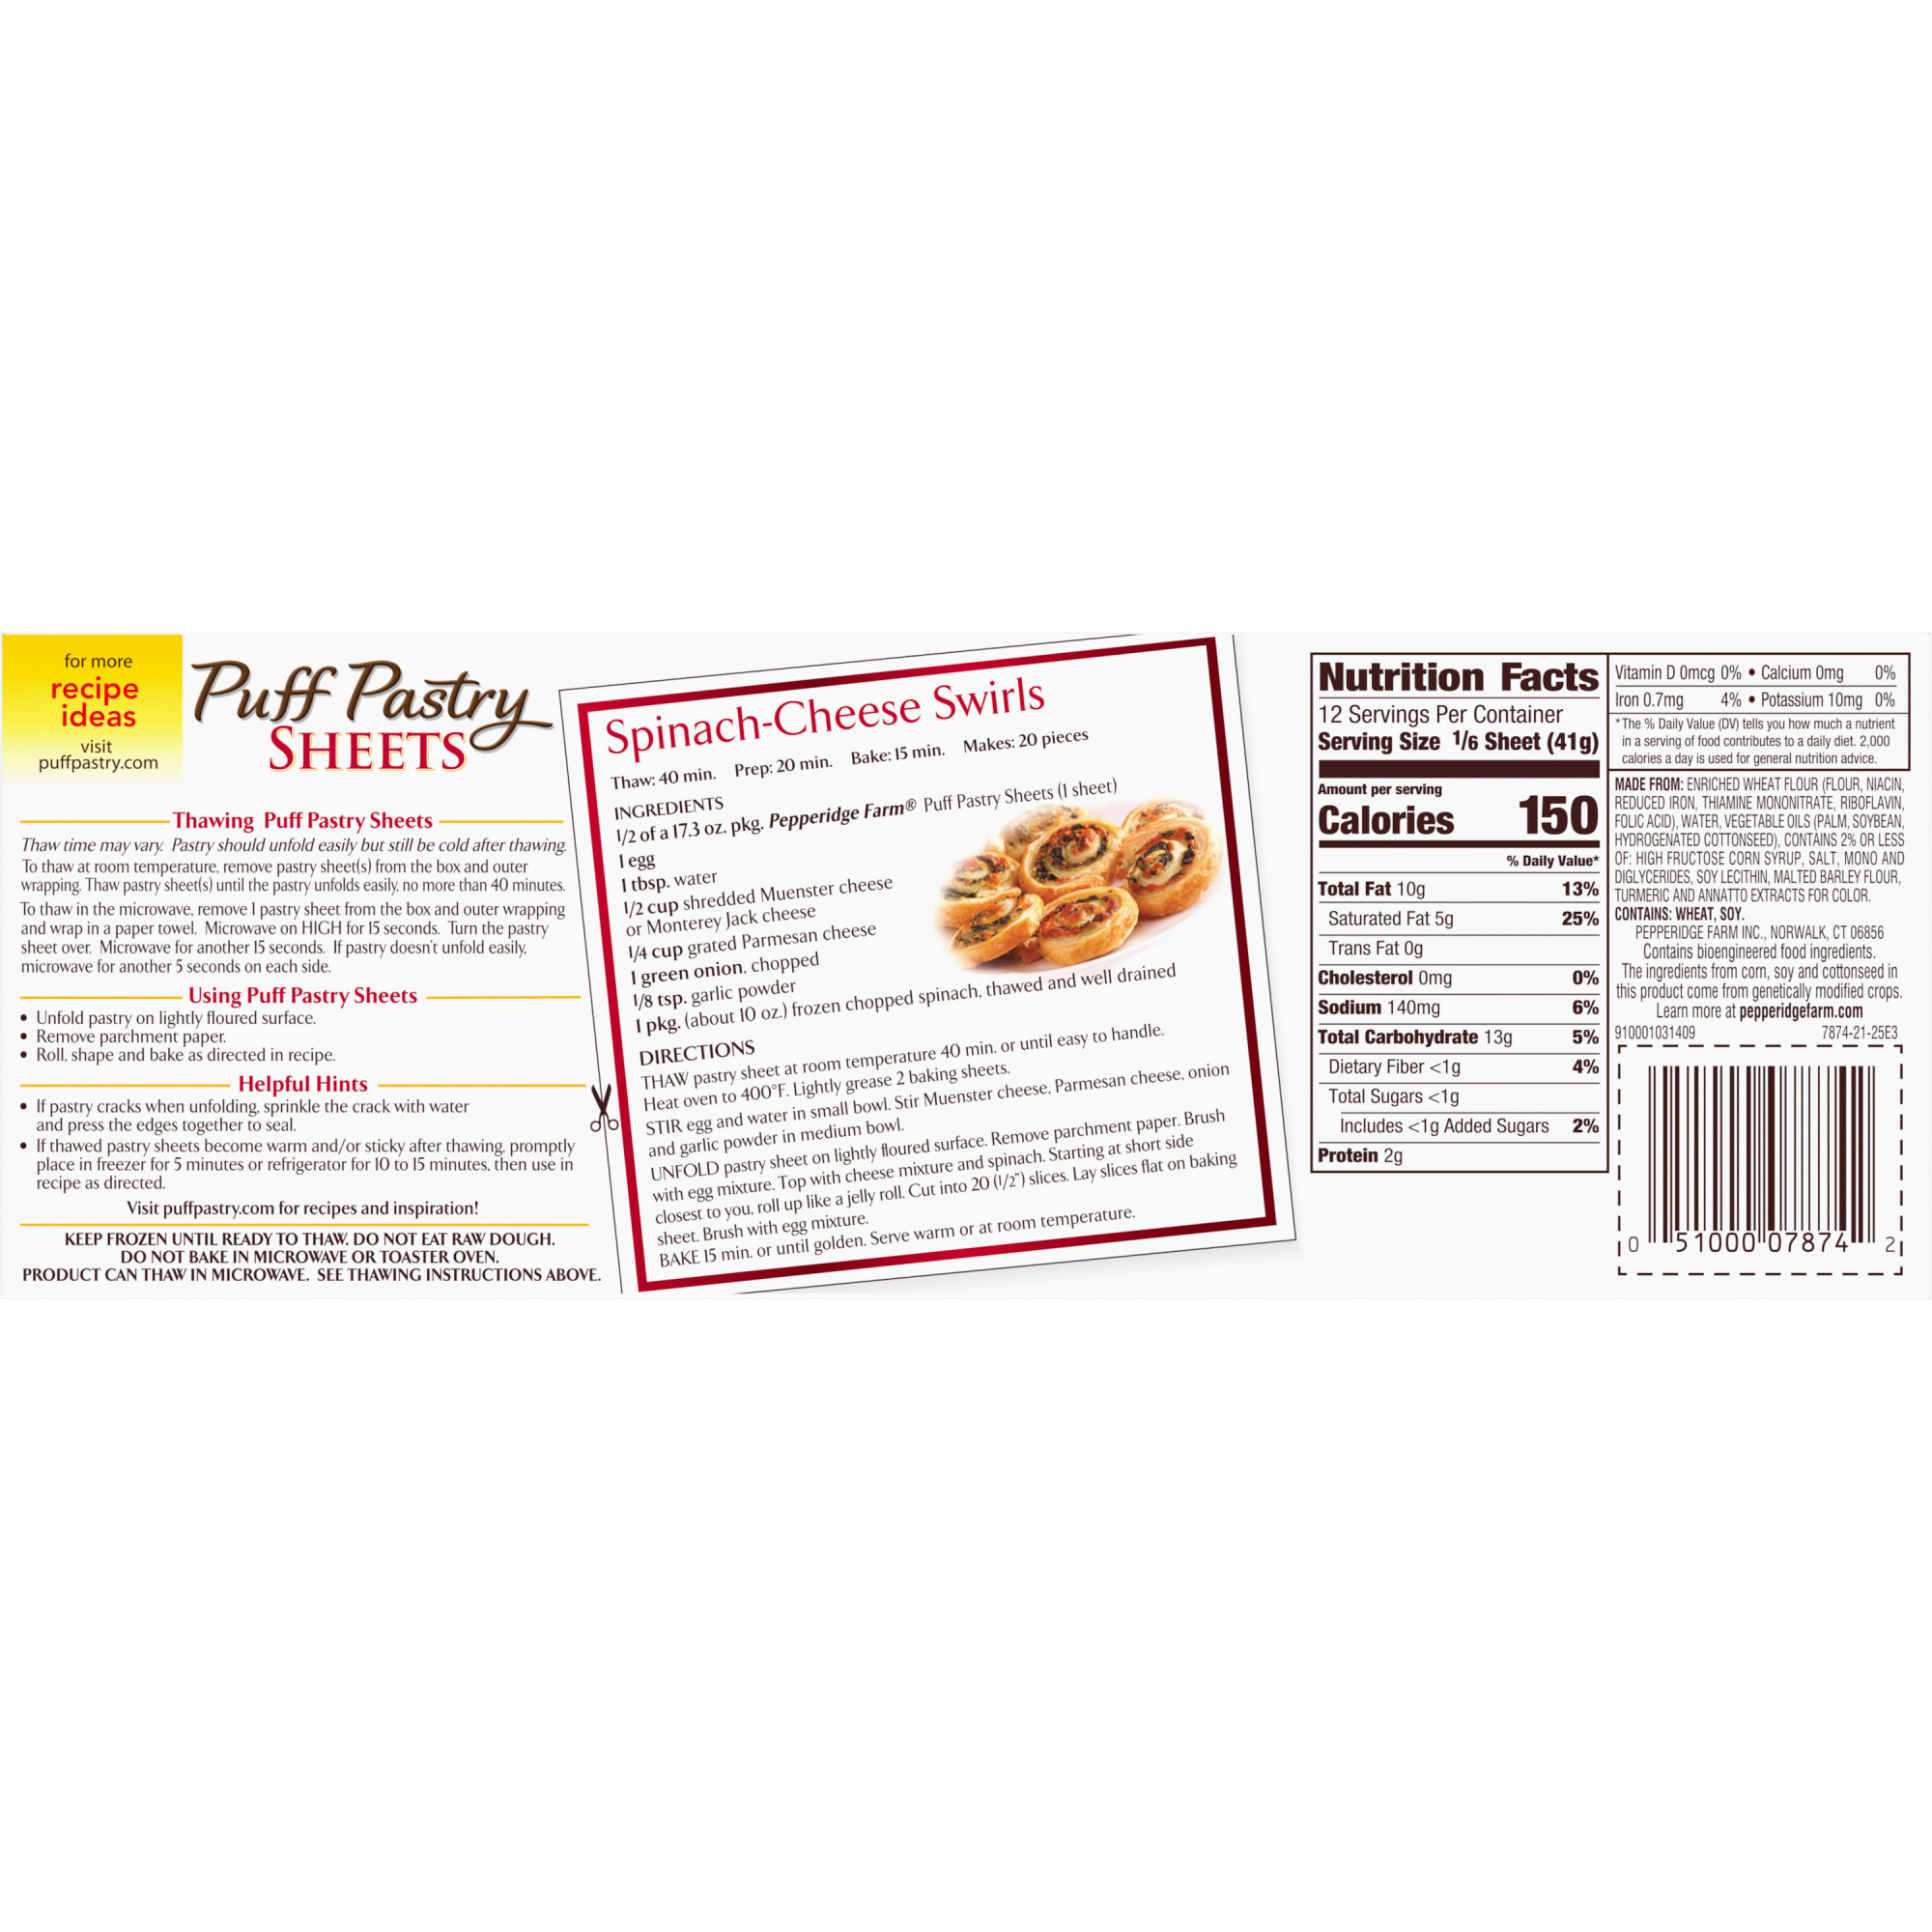 Pepperidge Farm Puff Pastry Frozen Pastry Dough Sheets, 2-Count, 17.3 oz. Box - image 5 of 8